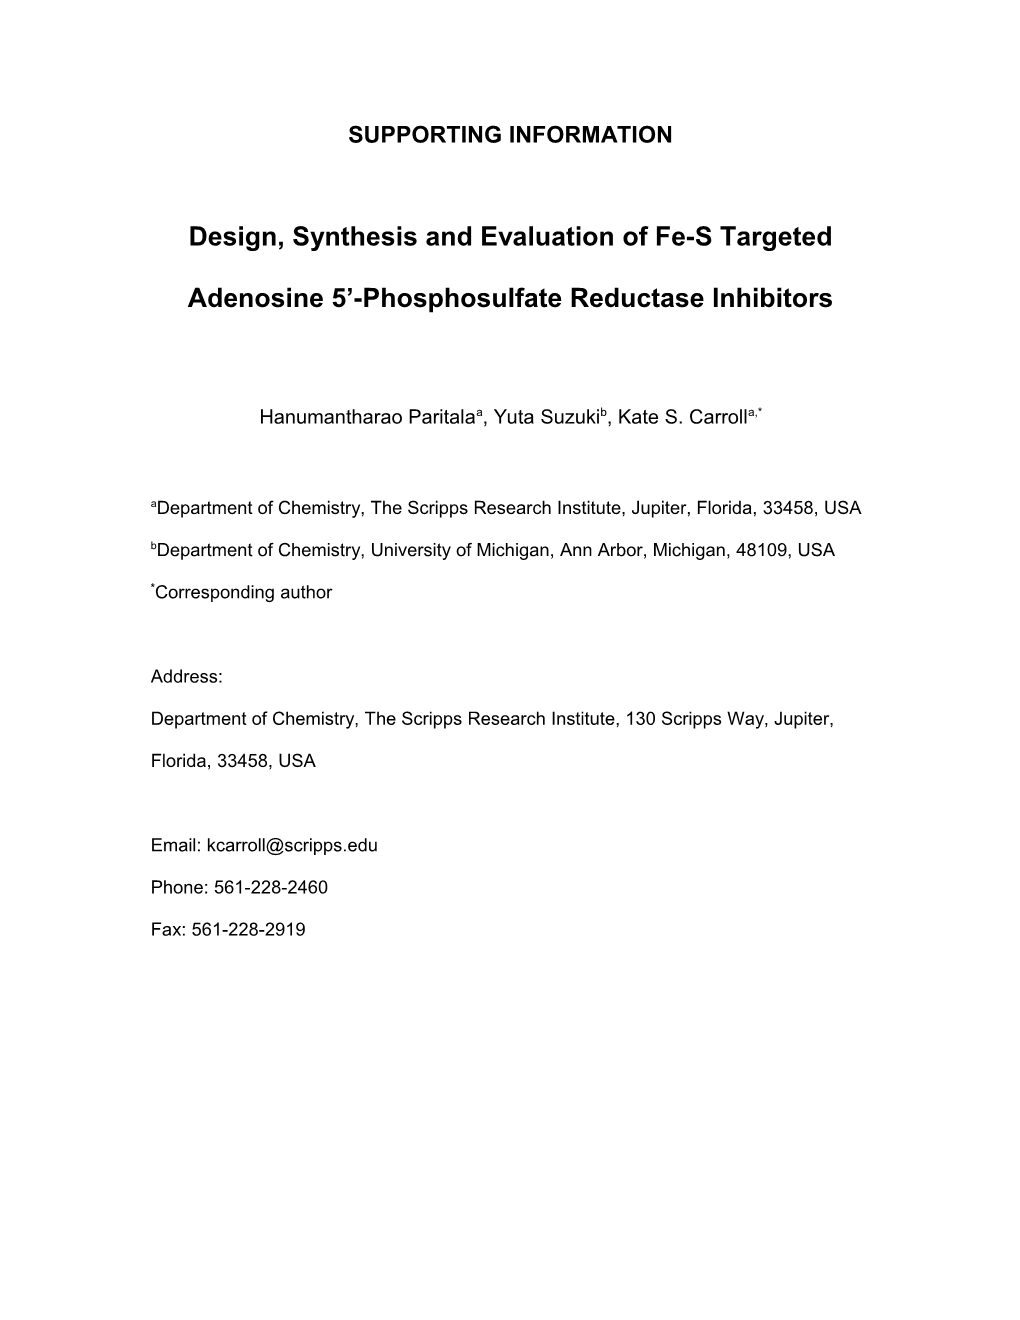 Design, Synthesis and Evaluation of Fe-S Targeted Adenosine 5 -Phosphosulfate Reductase